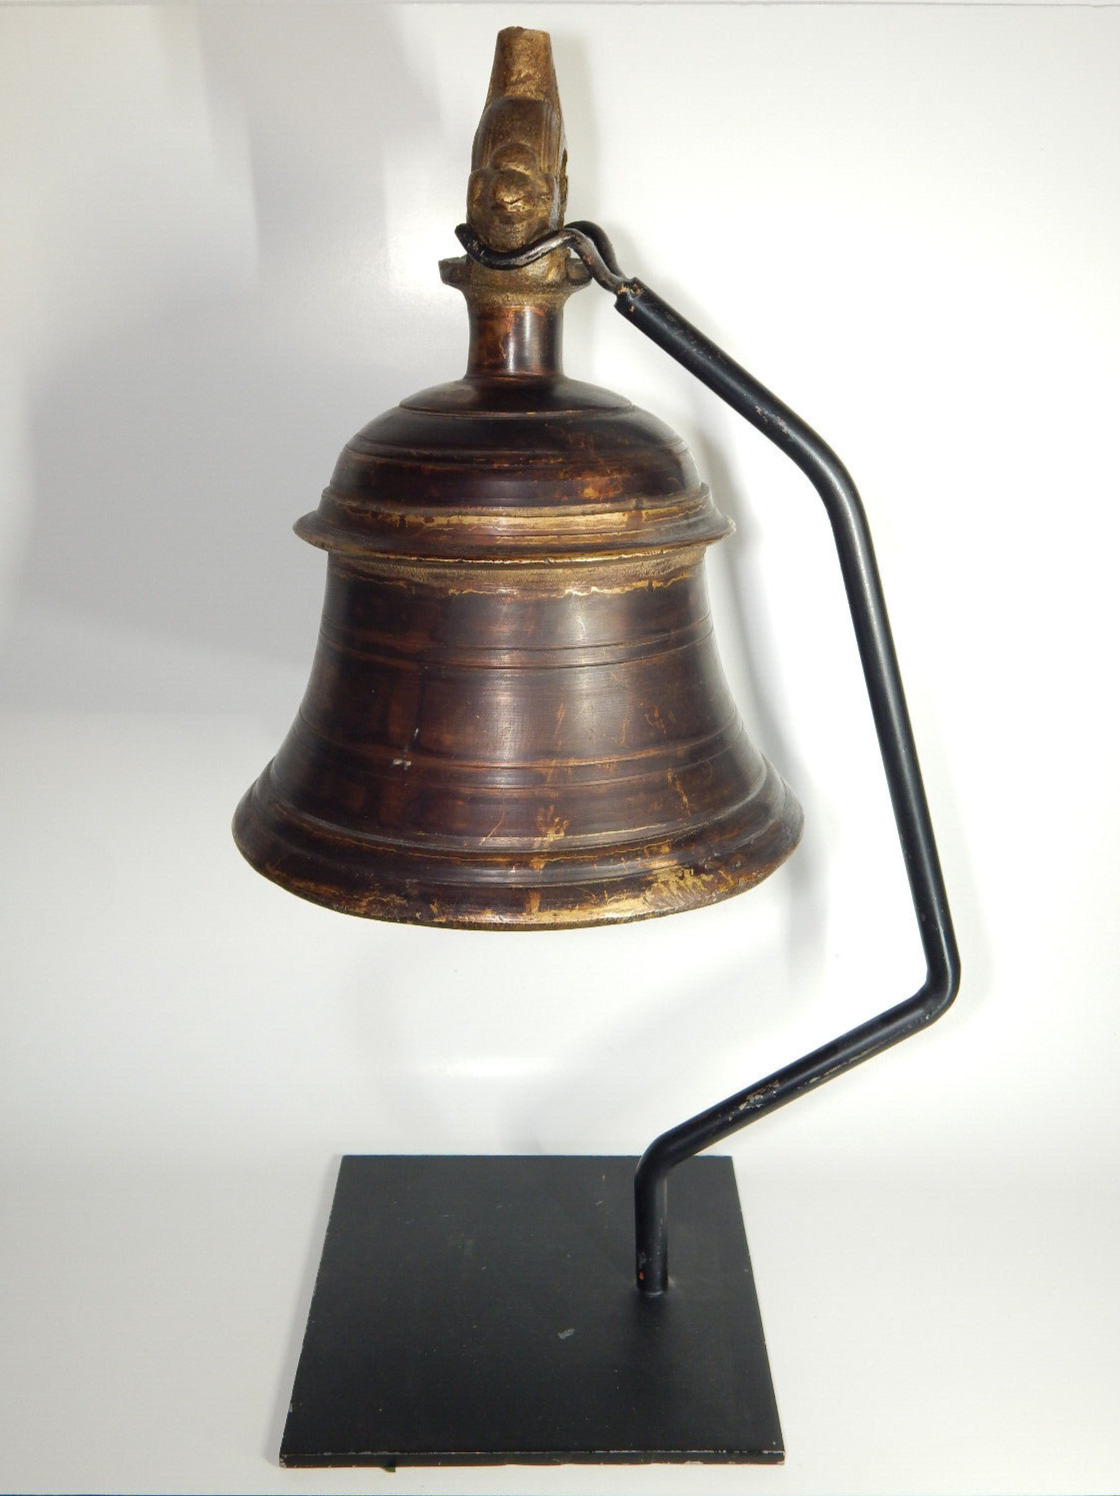 VINTAGE LARGE BRONZE TEMPLE BELL WITH CUSTOM IRON STAND FROM INDIA.